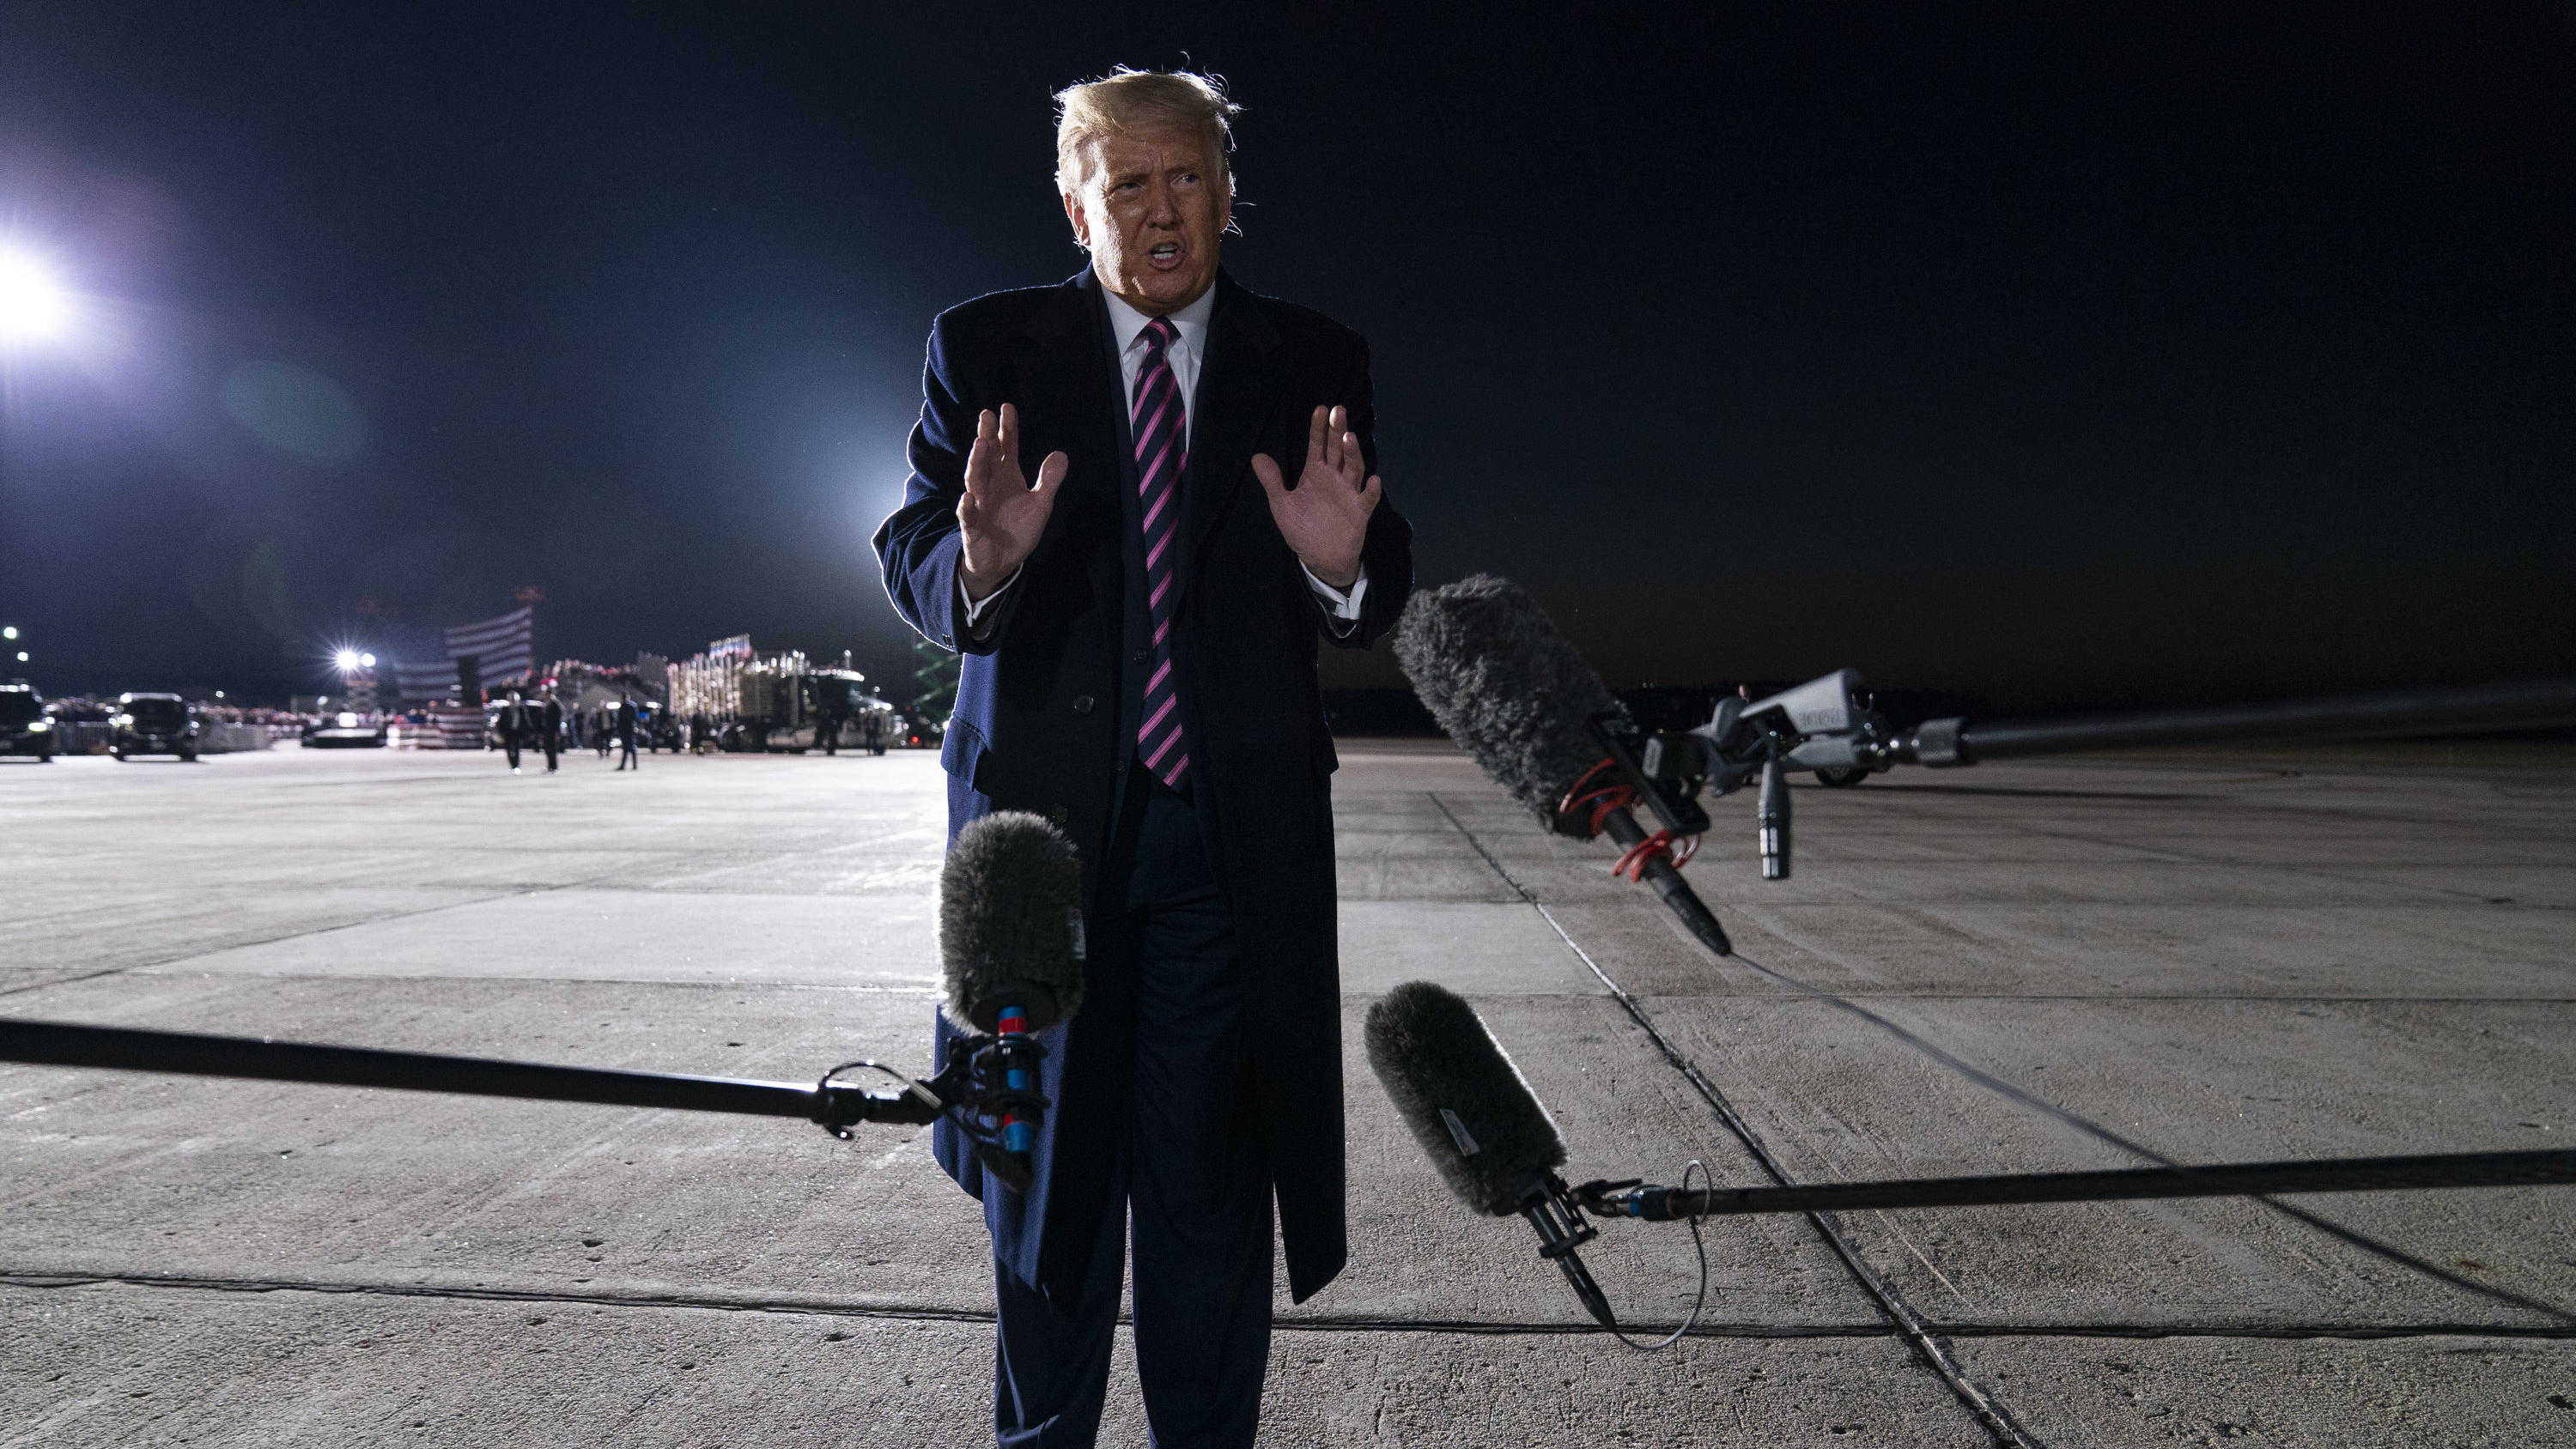 President Donald Trump talks to reporters about the death of Supreme Court Justice Ruth Bader Ginsburg, after a campaign rally, Friday, Sept. 18, 2020, in Bemidji, Minn. (AP Photo/Evan Vucci)